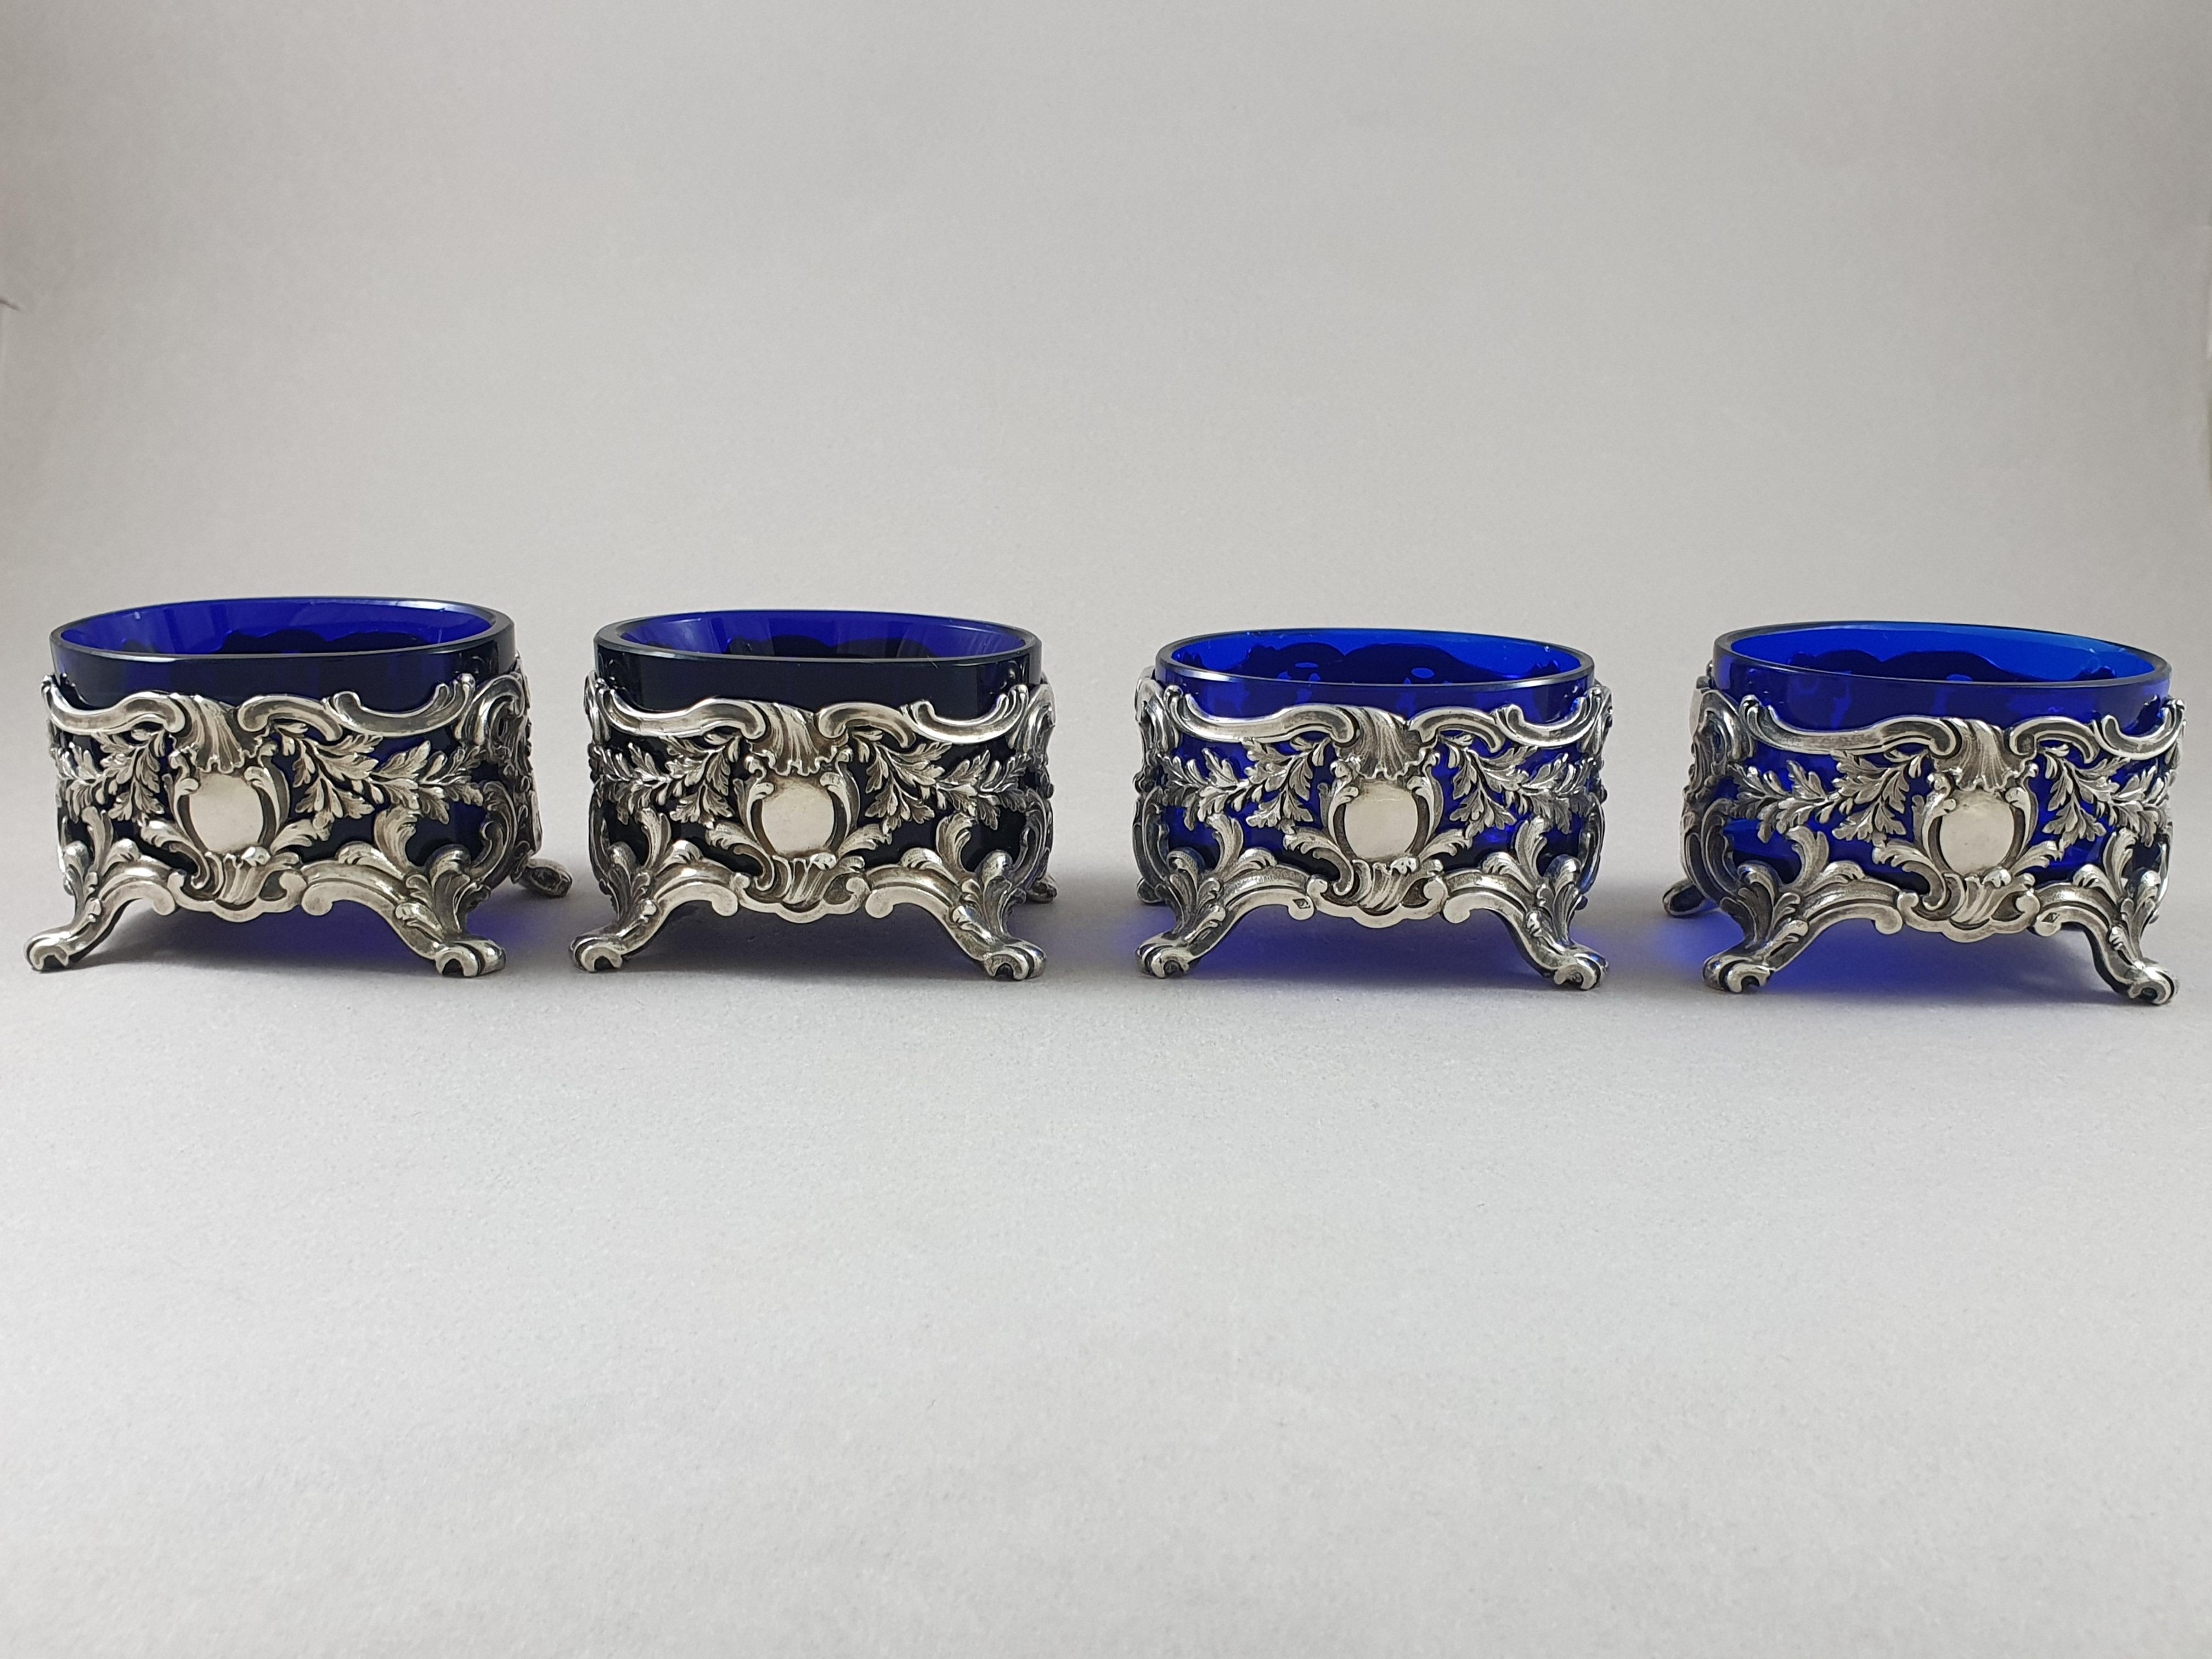 Beautiful set of 4 salt cellars in sterling silver from the 19th century, the interior in blue crystal.

They rest on feet ending in foliage, decoration of foliage, leaves and medallions.

Hallmarked Minerva 1st title for 950/1000 purity silver.